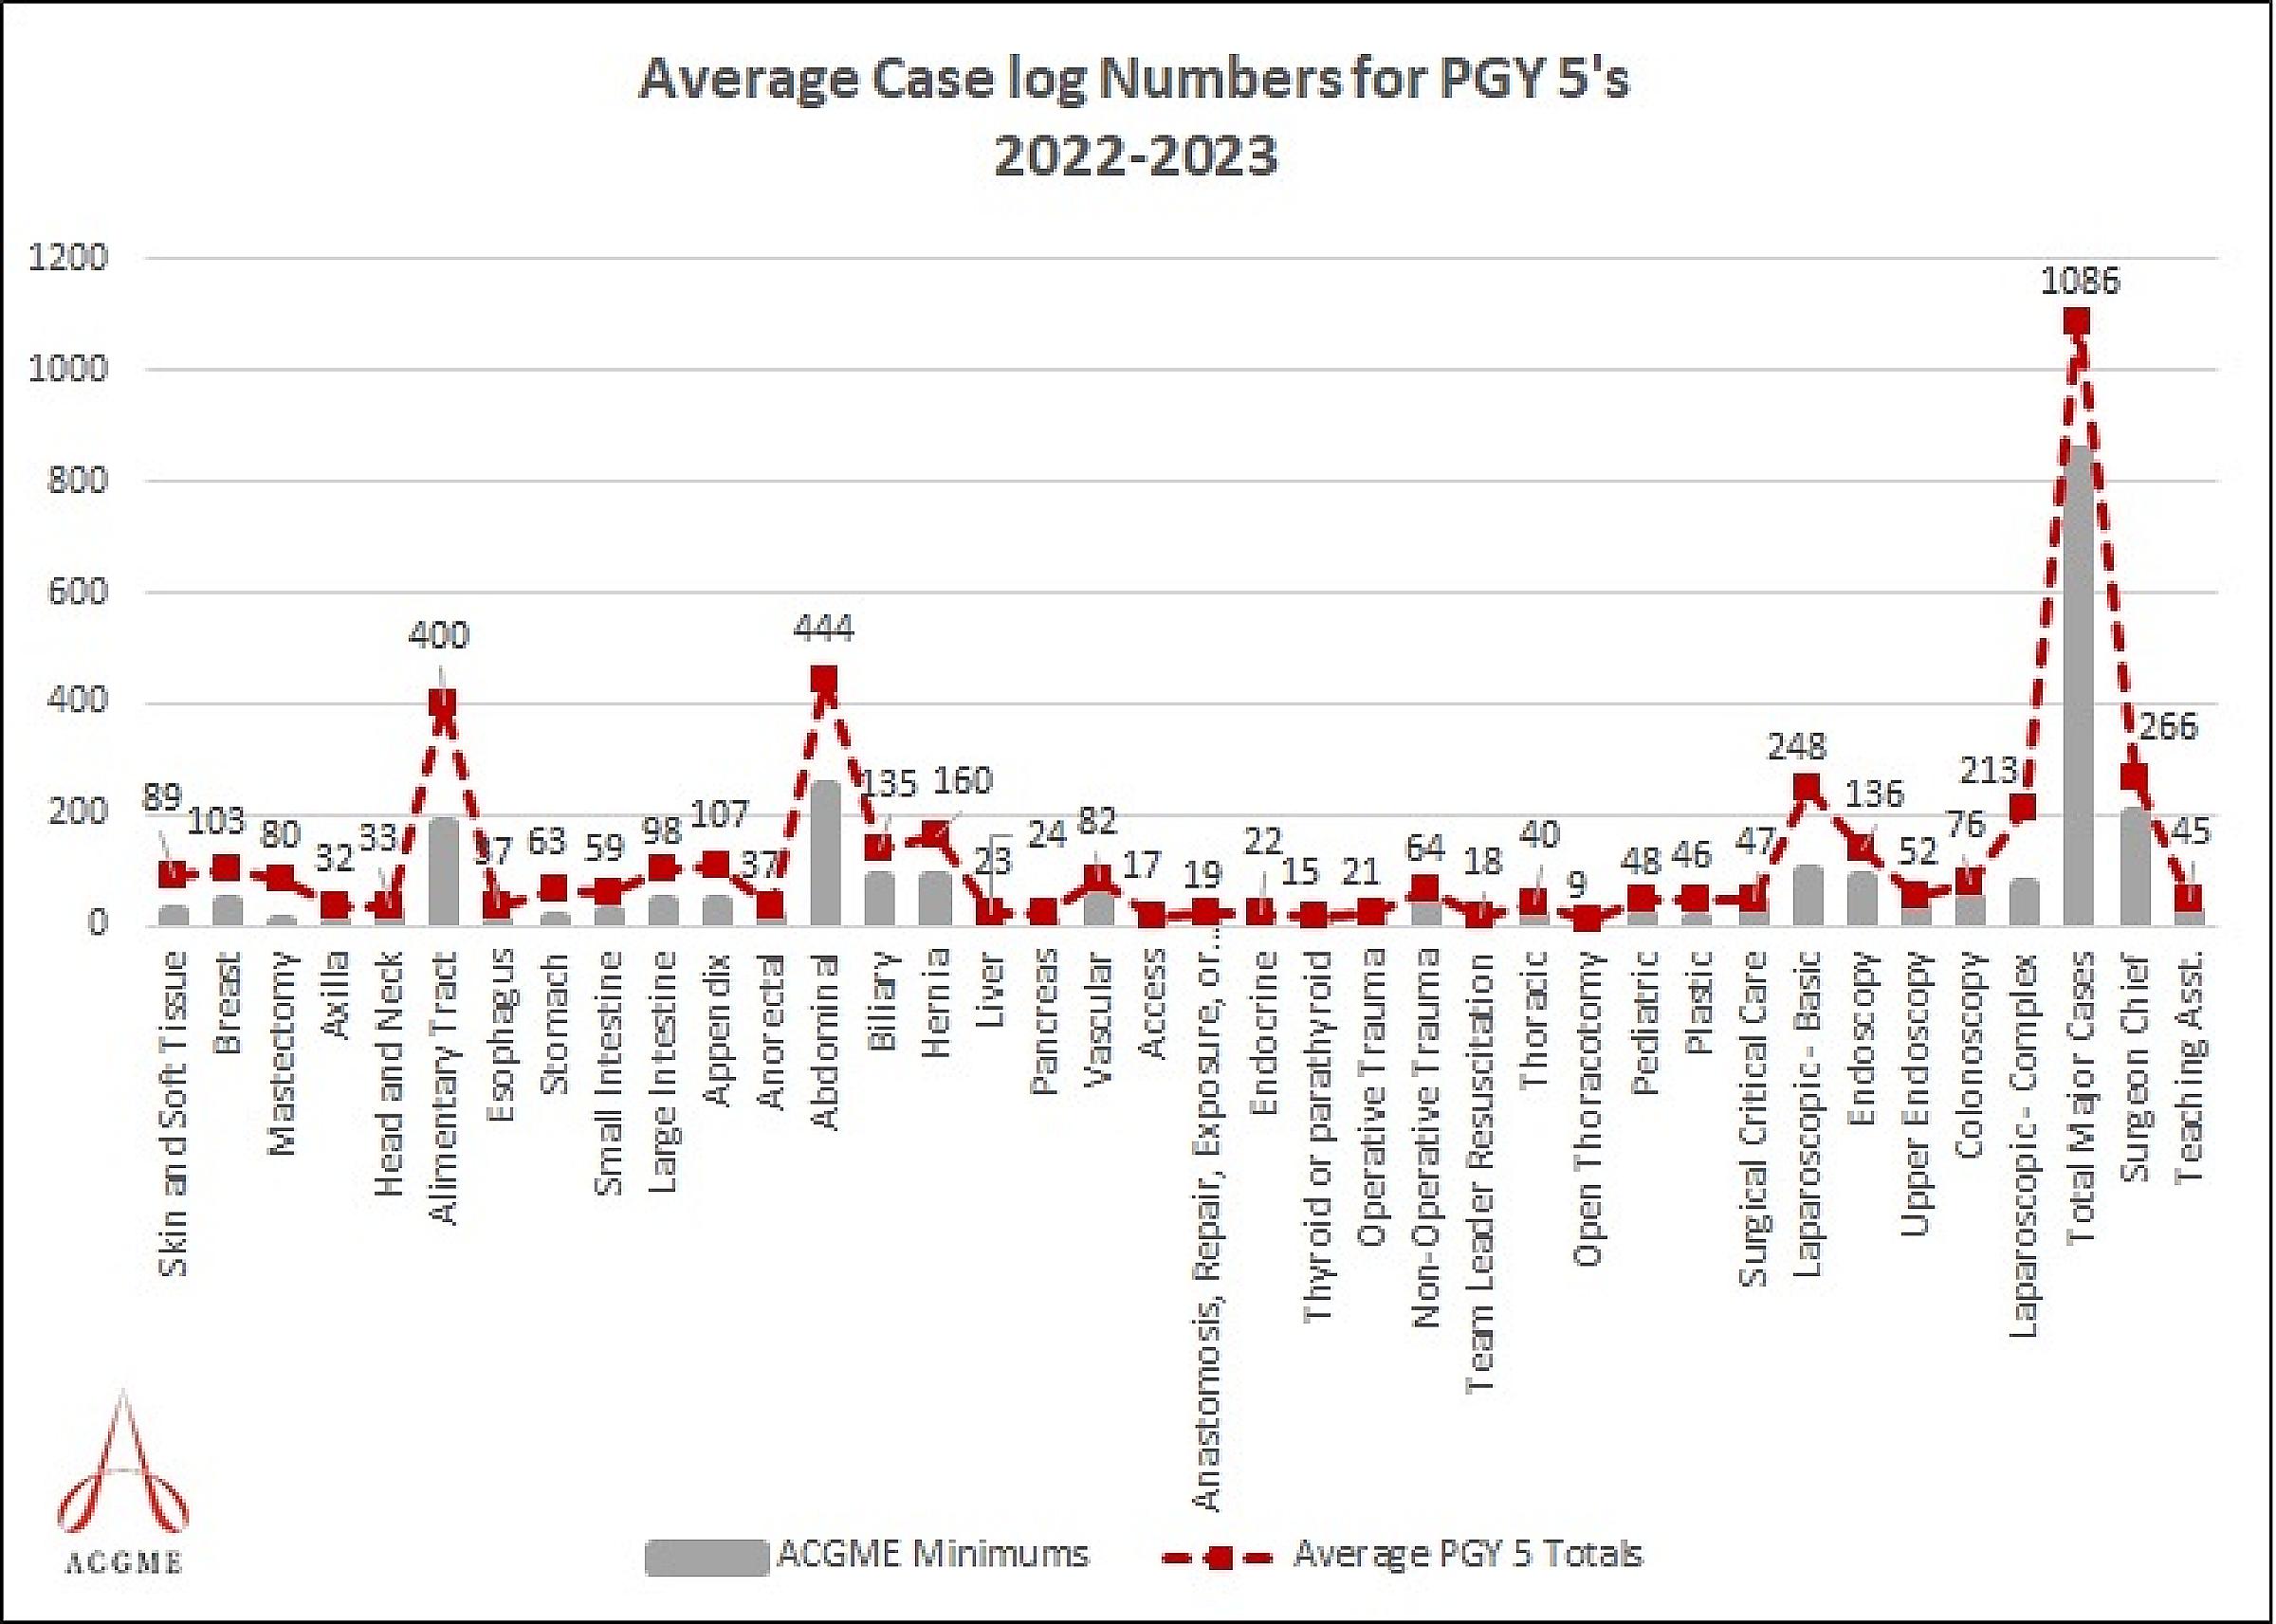 PGY 5 Total Cases